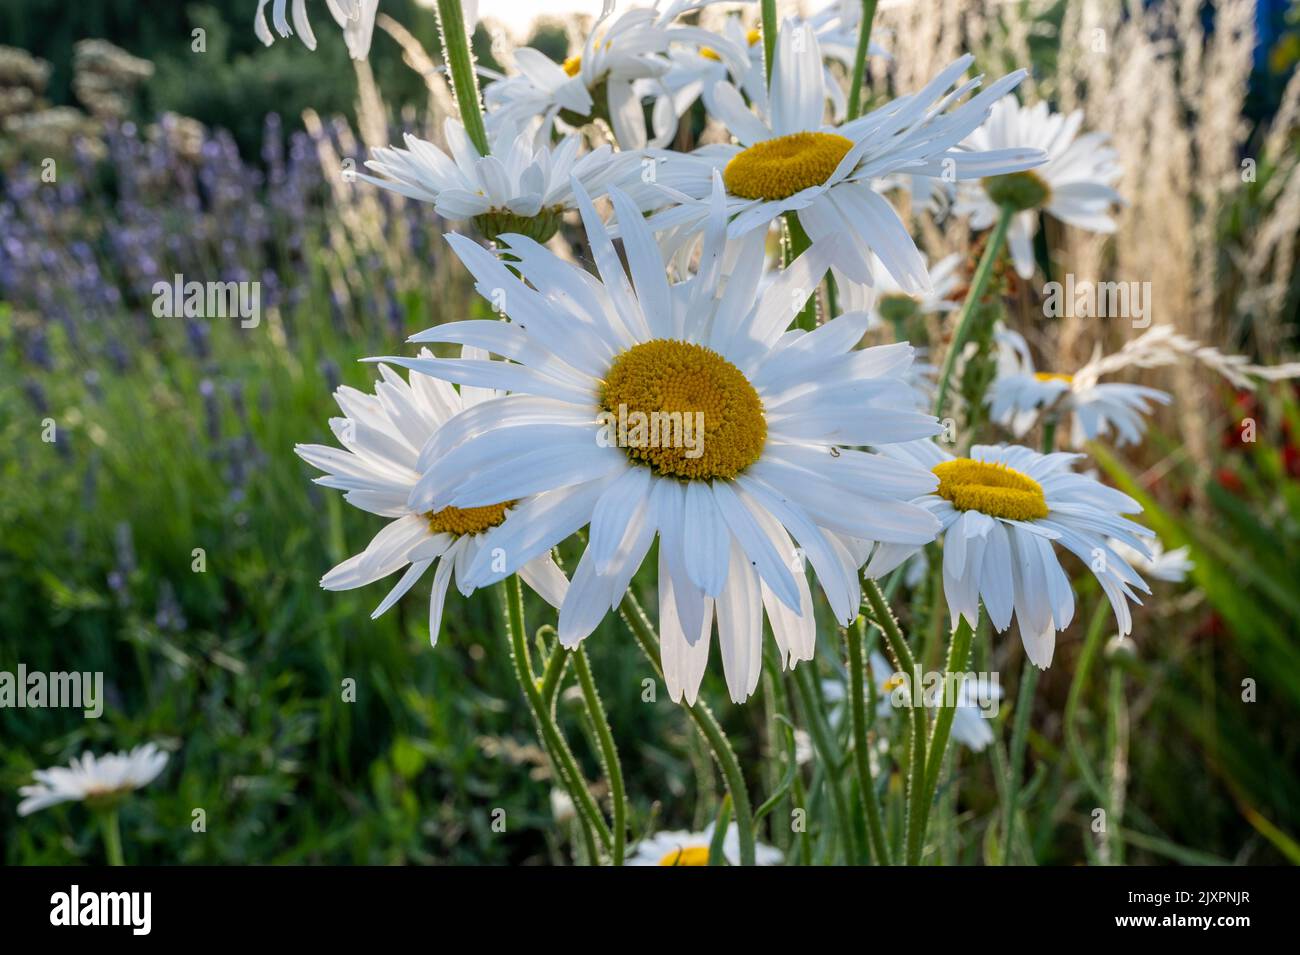 Prarie-style planting with shasta daisies and grasses in evening light. Stock Photo